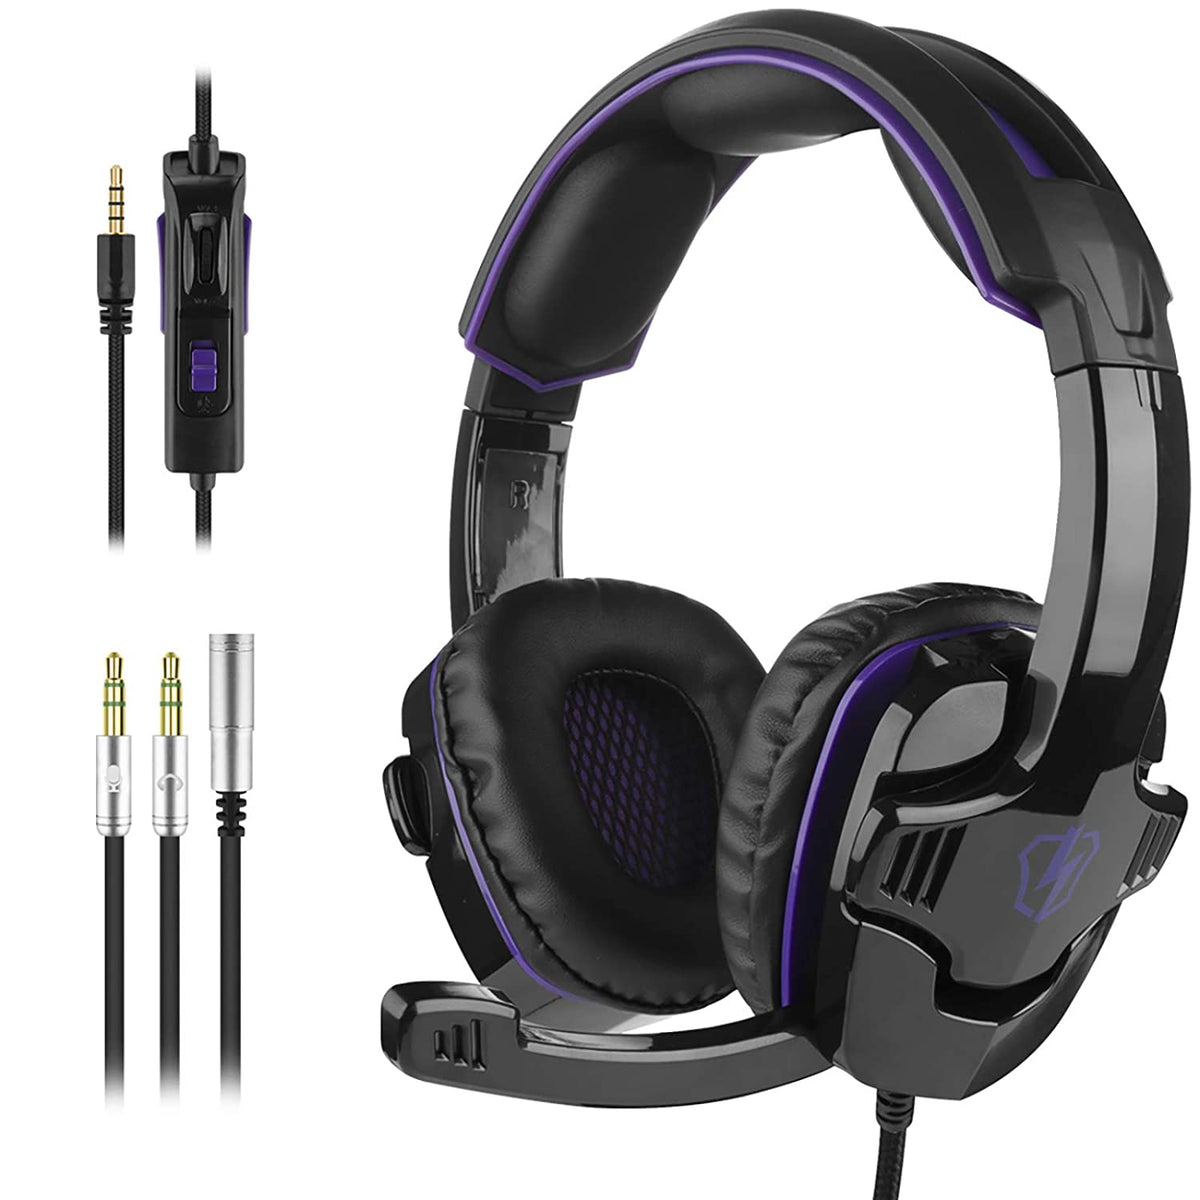 VBESTLIFE Wired Headphones, USB Wired Gaming Headphones with Noise  Isolation Technology, Ergonomic Design, Gaming Headset for Computer,  Phones, Gaming